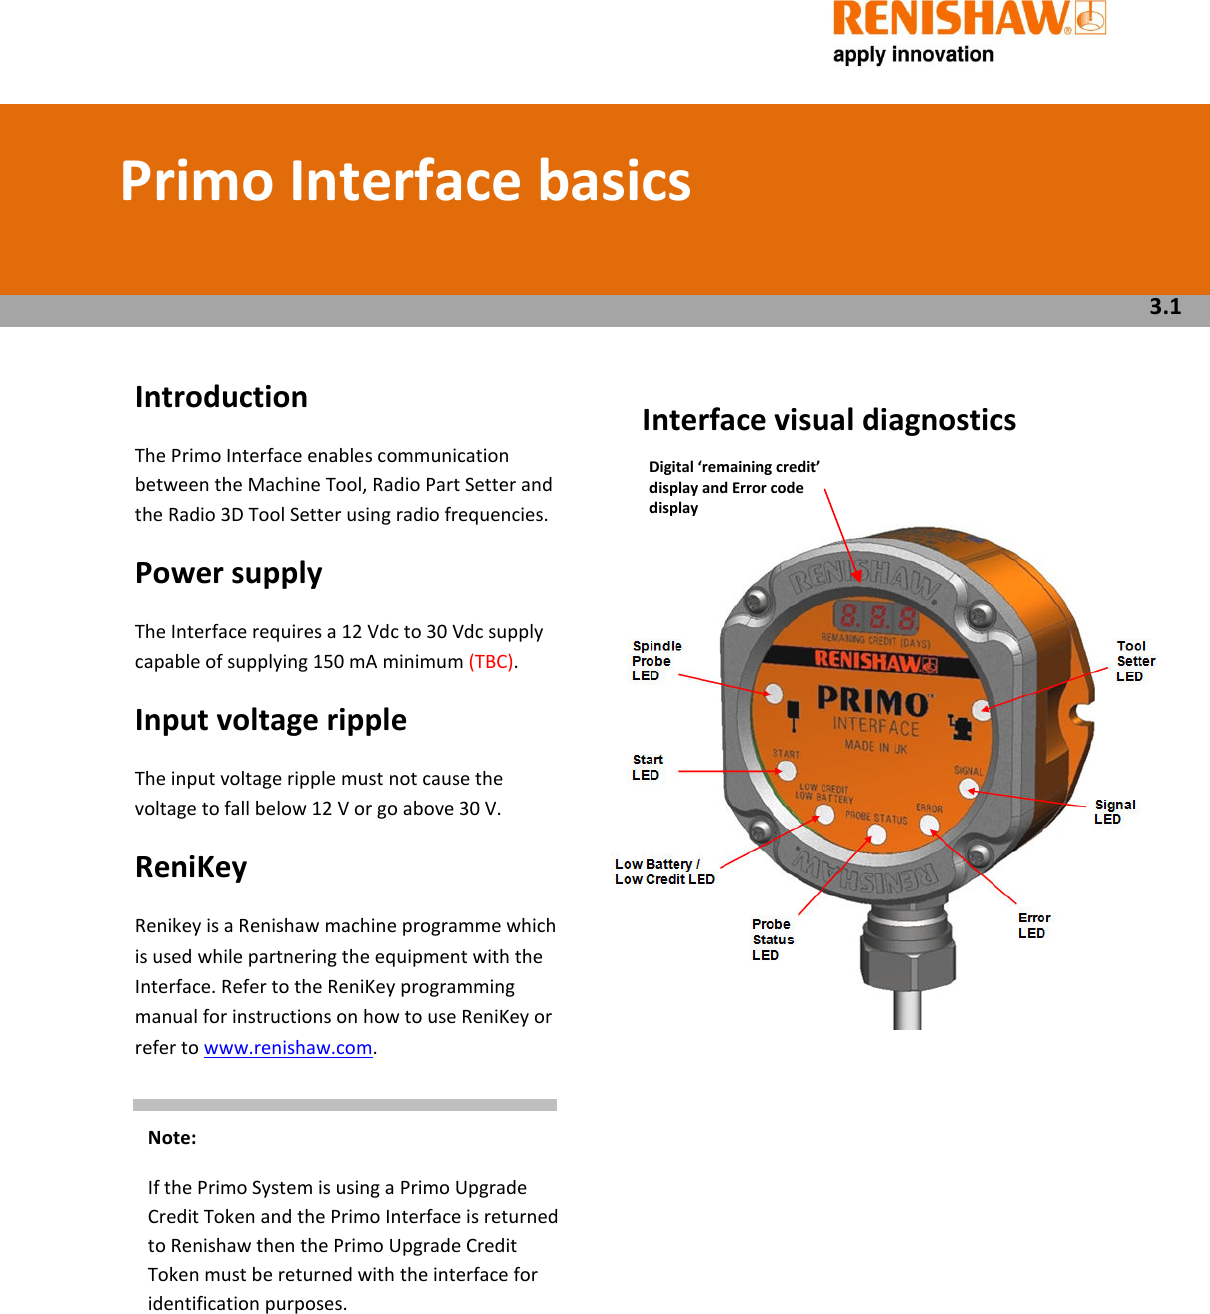        Introduction The Primo Interface enables communication between the Machine Tool, Radio Part Setter and the Radio 3D Tool Setter using radio frequencies. Power supply  The Interface requires a 12 Vdc to 30 Vdc supply capable of supplying 150 mA minimum (TBC). Input voltage ripple  The input voltage ripple must not cause the voltage to fall below 12 V or go above 30 V. ReniKey Renikey is a Renishaw machine programme which is used while partnering the equipment with the Interface. Refer to the ReniKey programming manual for instructions on how to use ReniKey or refer to www.renishaw.com.           Interface visual diagnostics              Primo Interface basics  3.1 Digital ‘remaining credit’ display and Error code display Note: If the Primo System is using a Primo Upgrade Credit Token and the Primo Interface is returned to Renishaw then the Primo Upgrade Credit Token must be returned with the interface for identification purposes. 